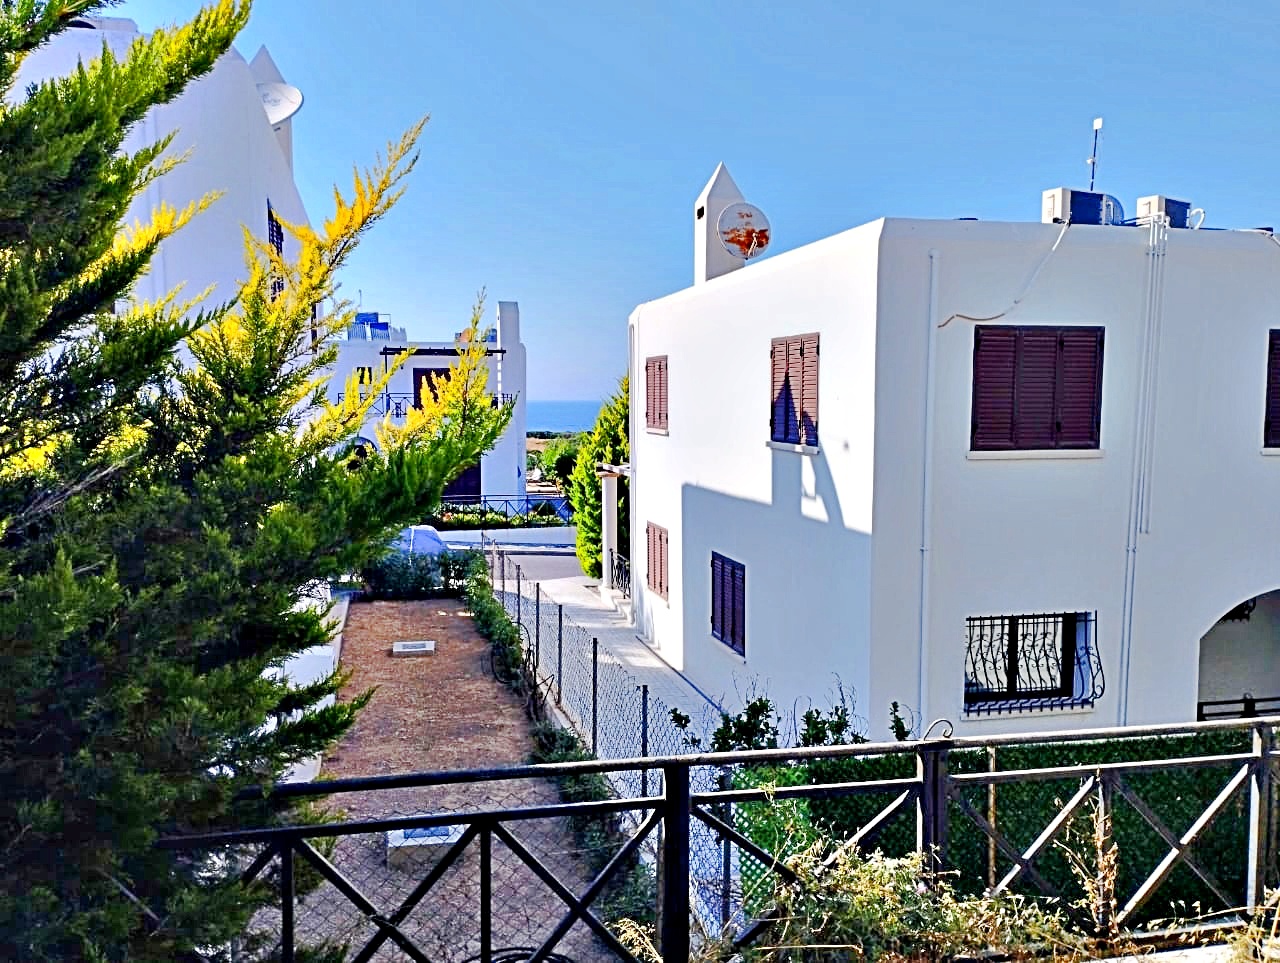 Villa - townhouse in Tatlysu in a beautiful complex with a swimming pool and access to the sea